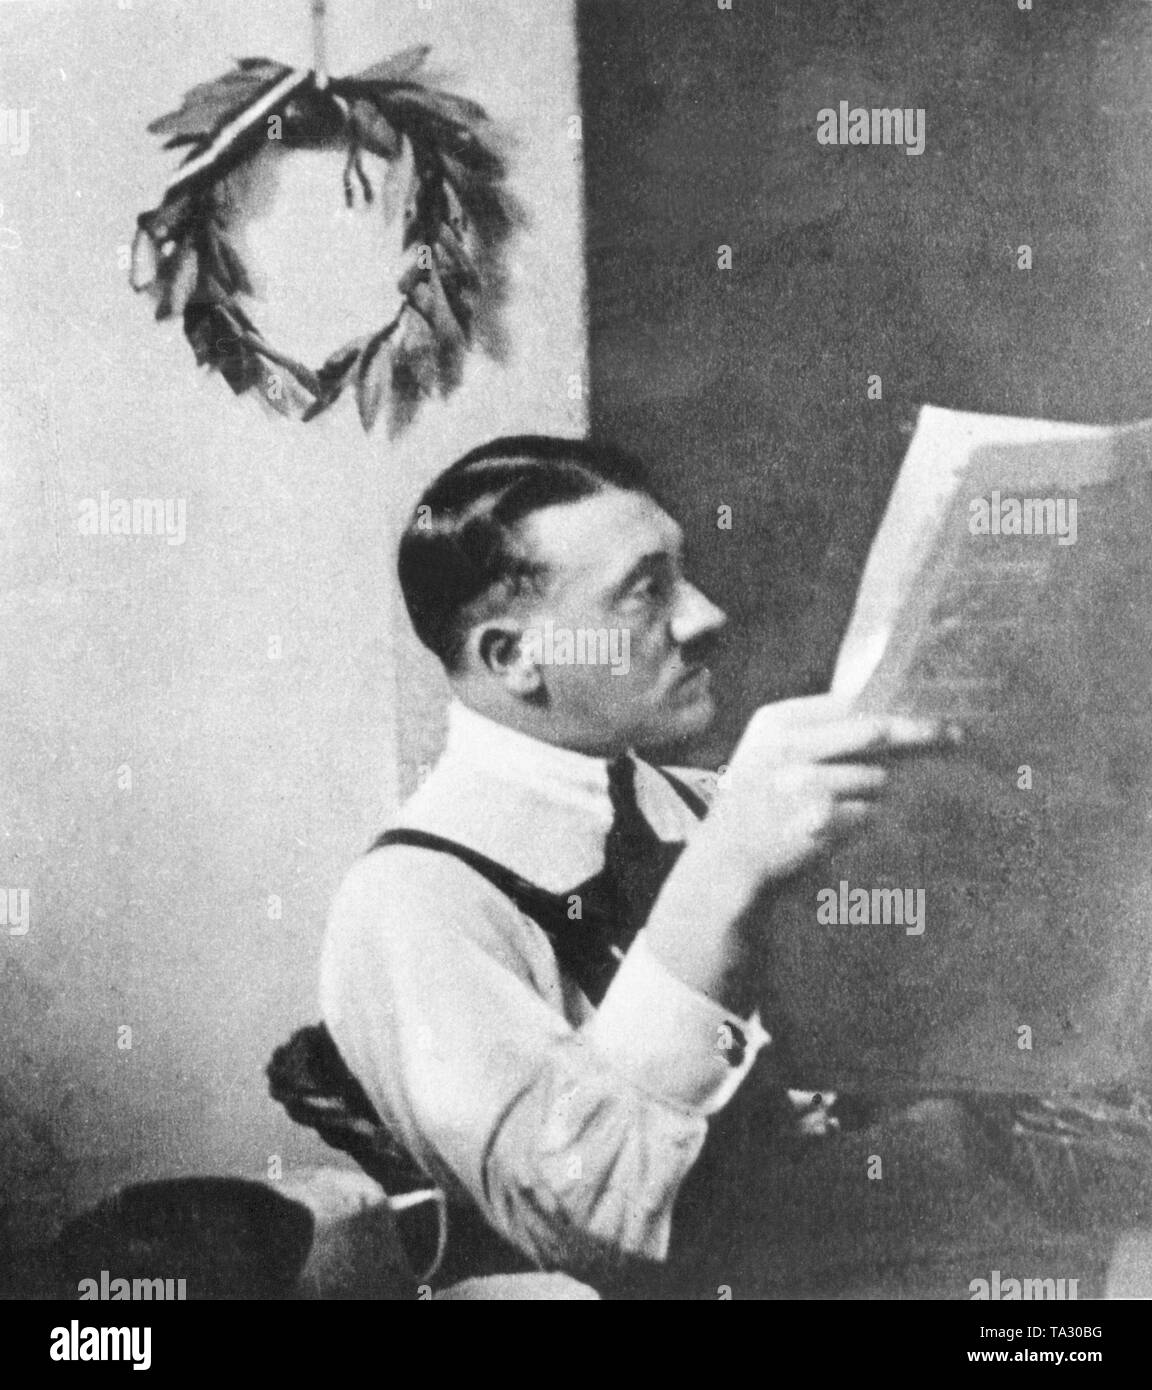 Adolf Hitler with a laurel wreath of the ancient winners, full of symbolism, hanging on the wall in his cell in the prison in Landsberg am Lech, where he served his sentence shortly after the failed coup attempt on 9 November, 1923 in Munich. Stock Photo